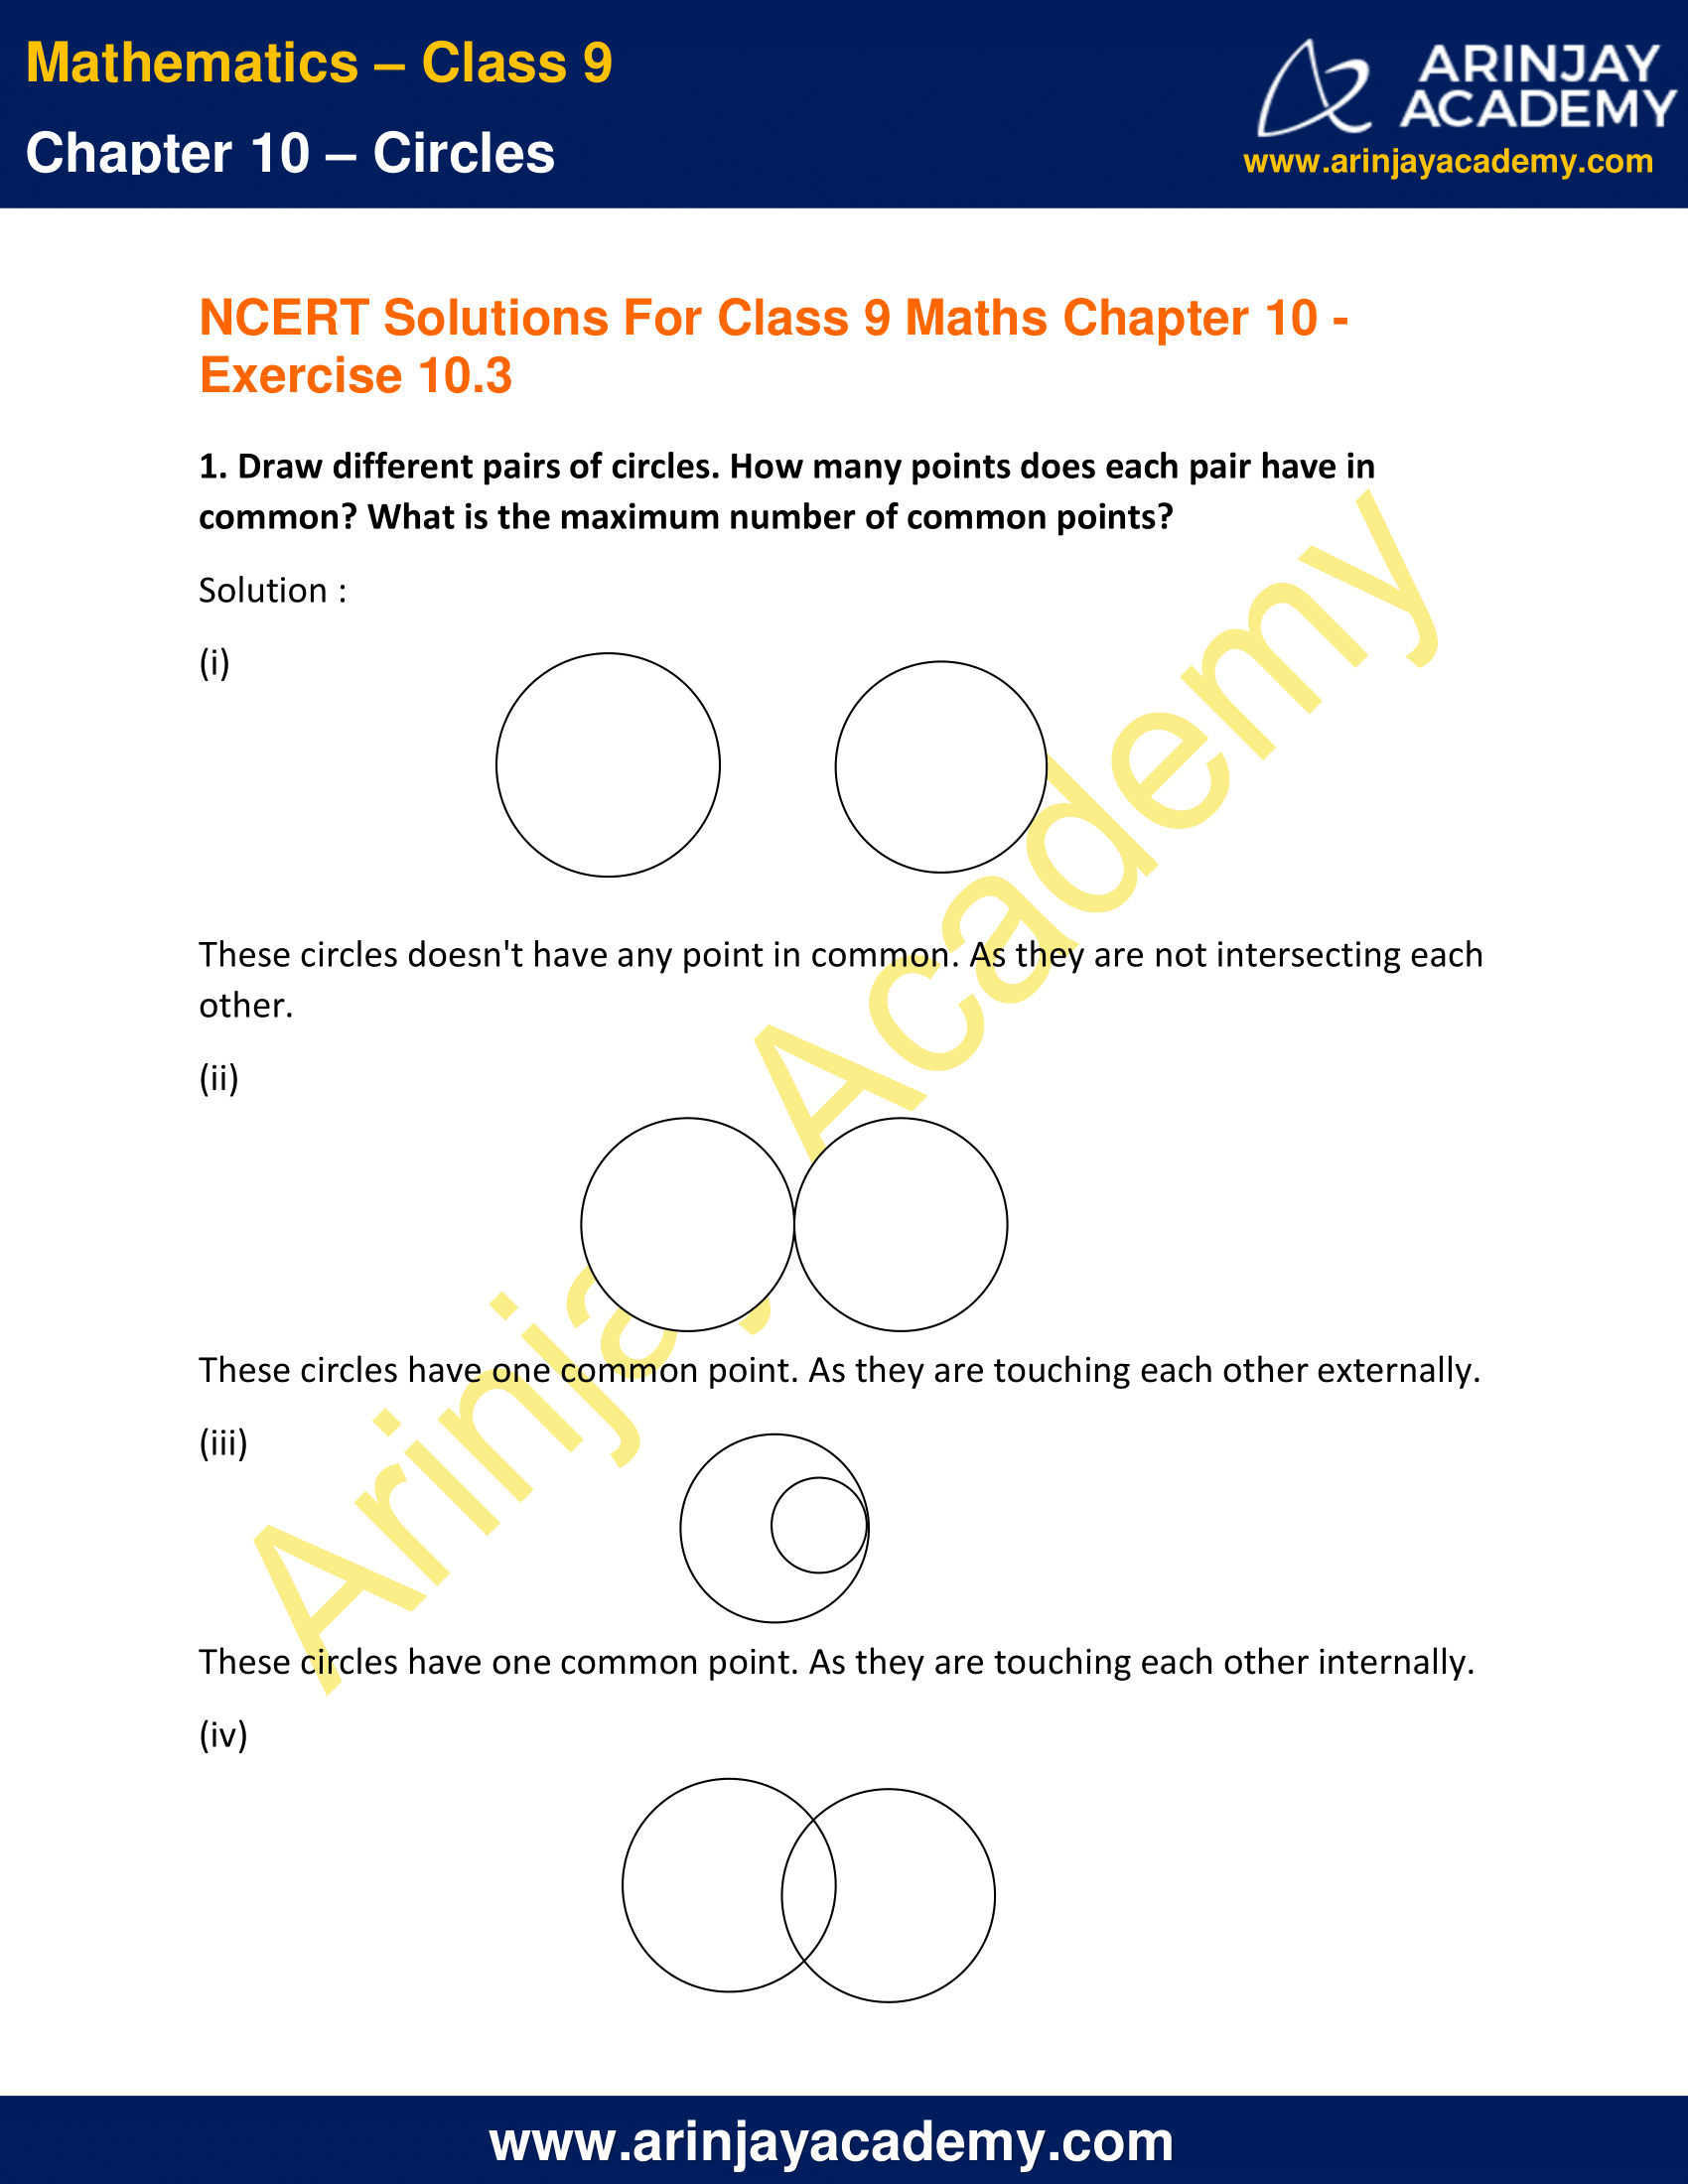 NCERT Solutions for Class 9 Maths Chapter 10 Exercise 10.3 image 1